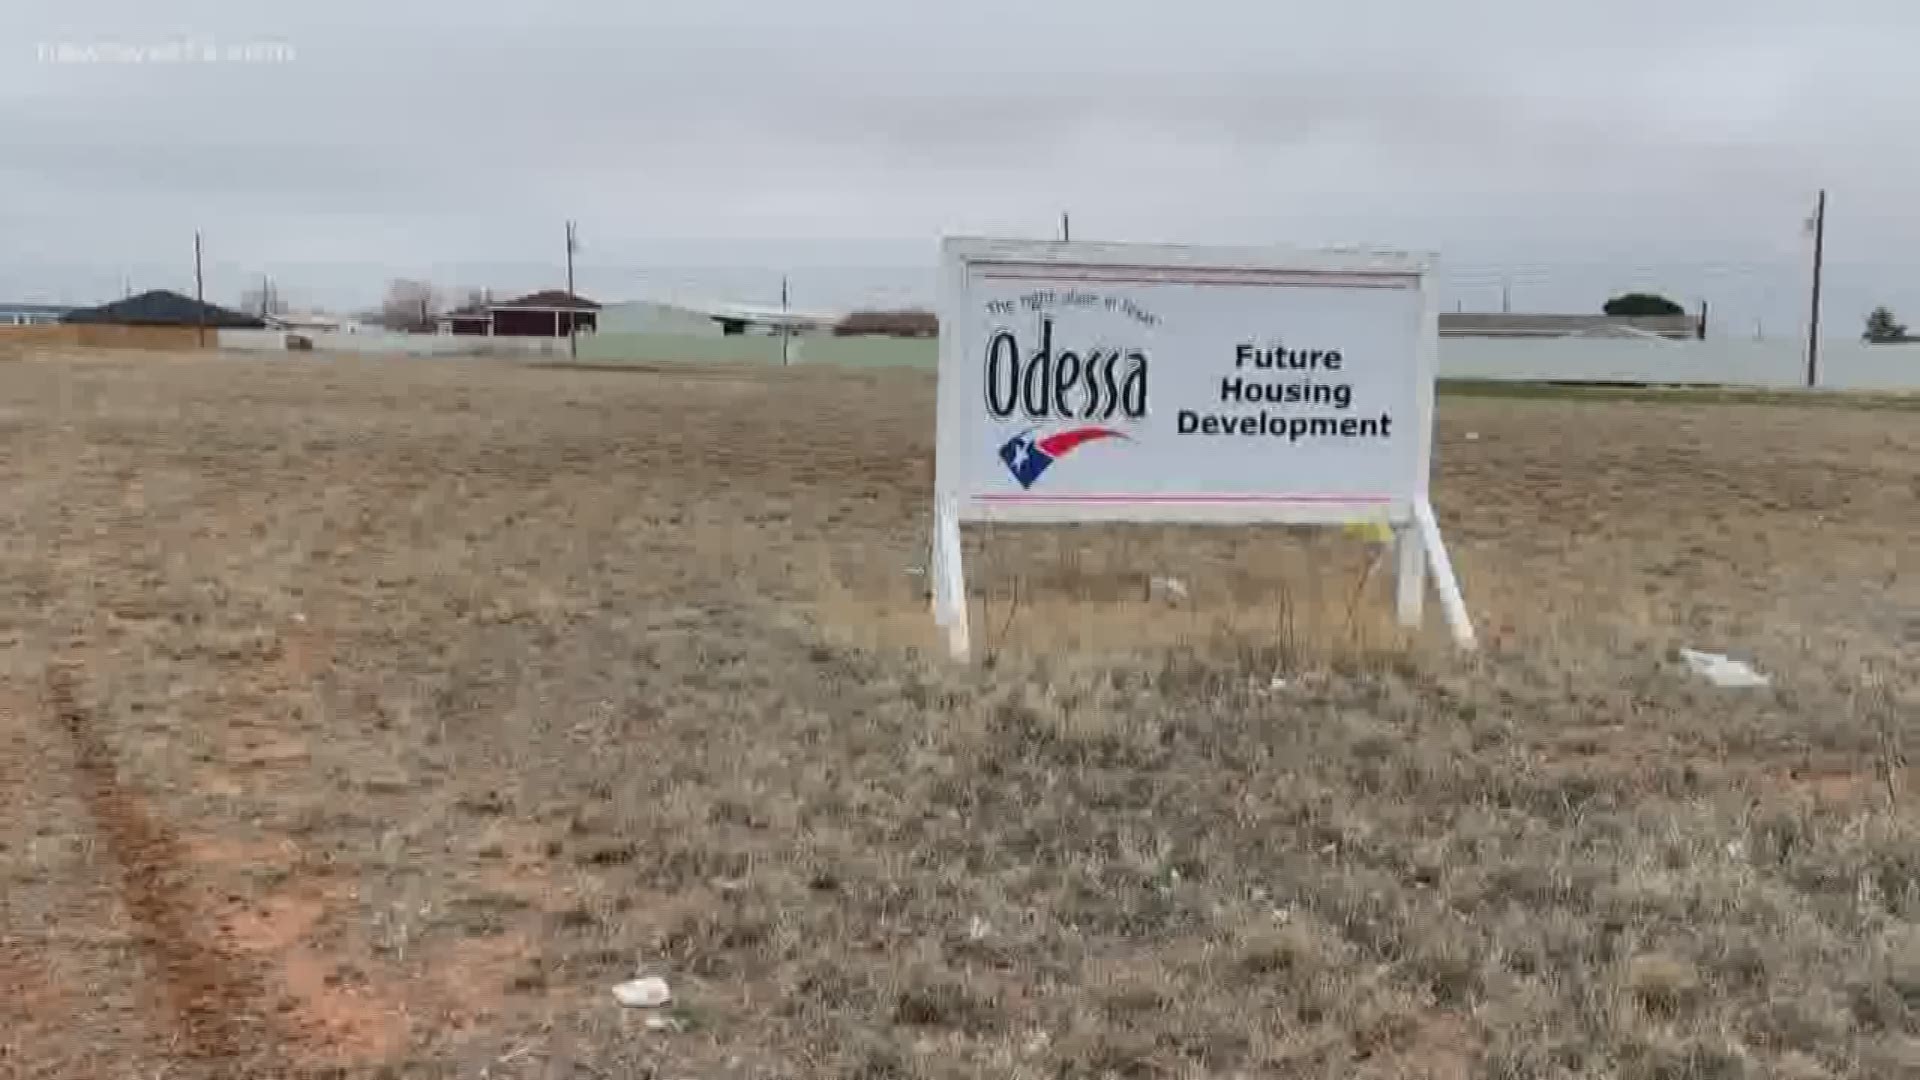 After six years of planning a partnership between Grow Odessa, Odessa Finance and the city of Odessa will allow 45 new homes to be built.